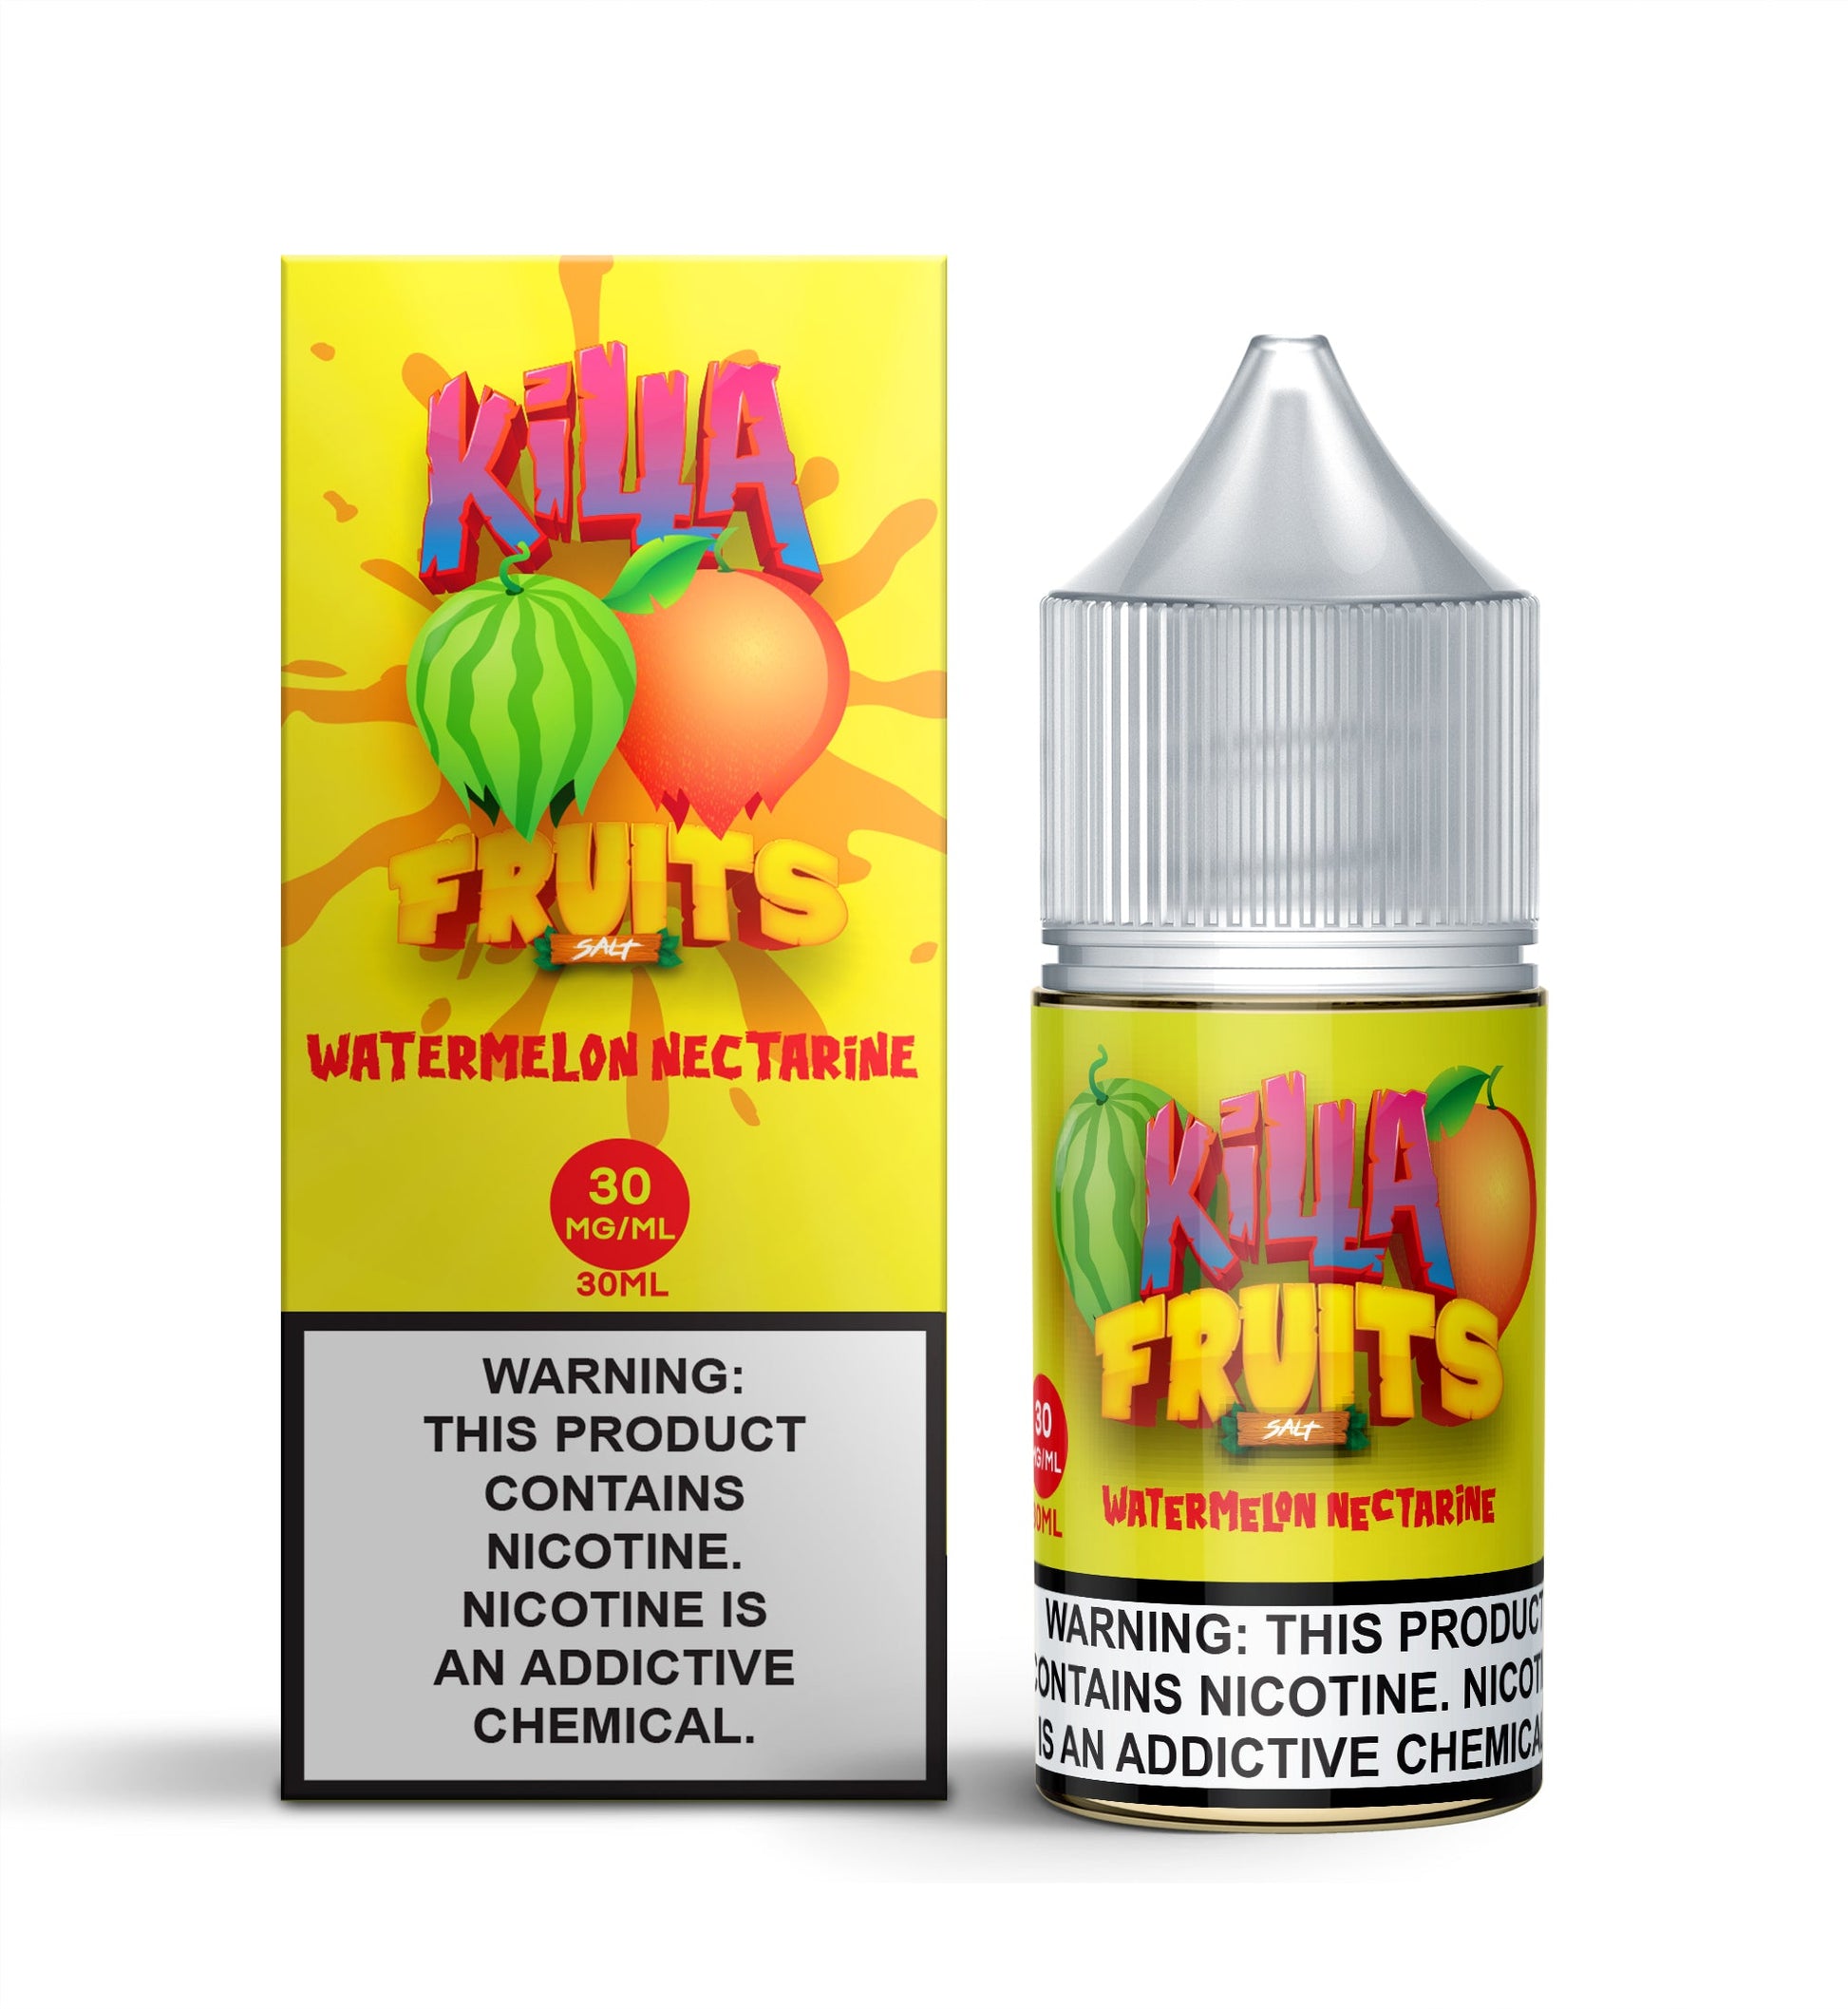 Watermelon Nectarine by Killa Fruits Salts Series 30mL with packaging